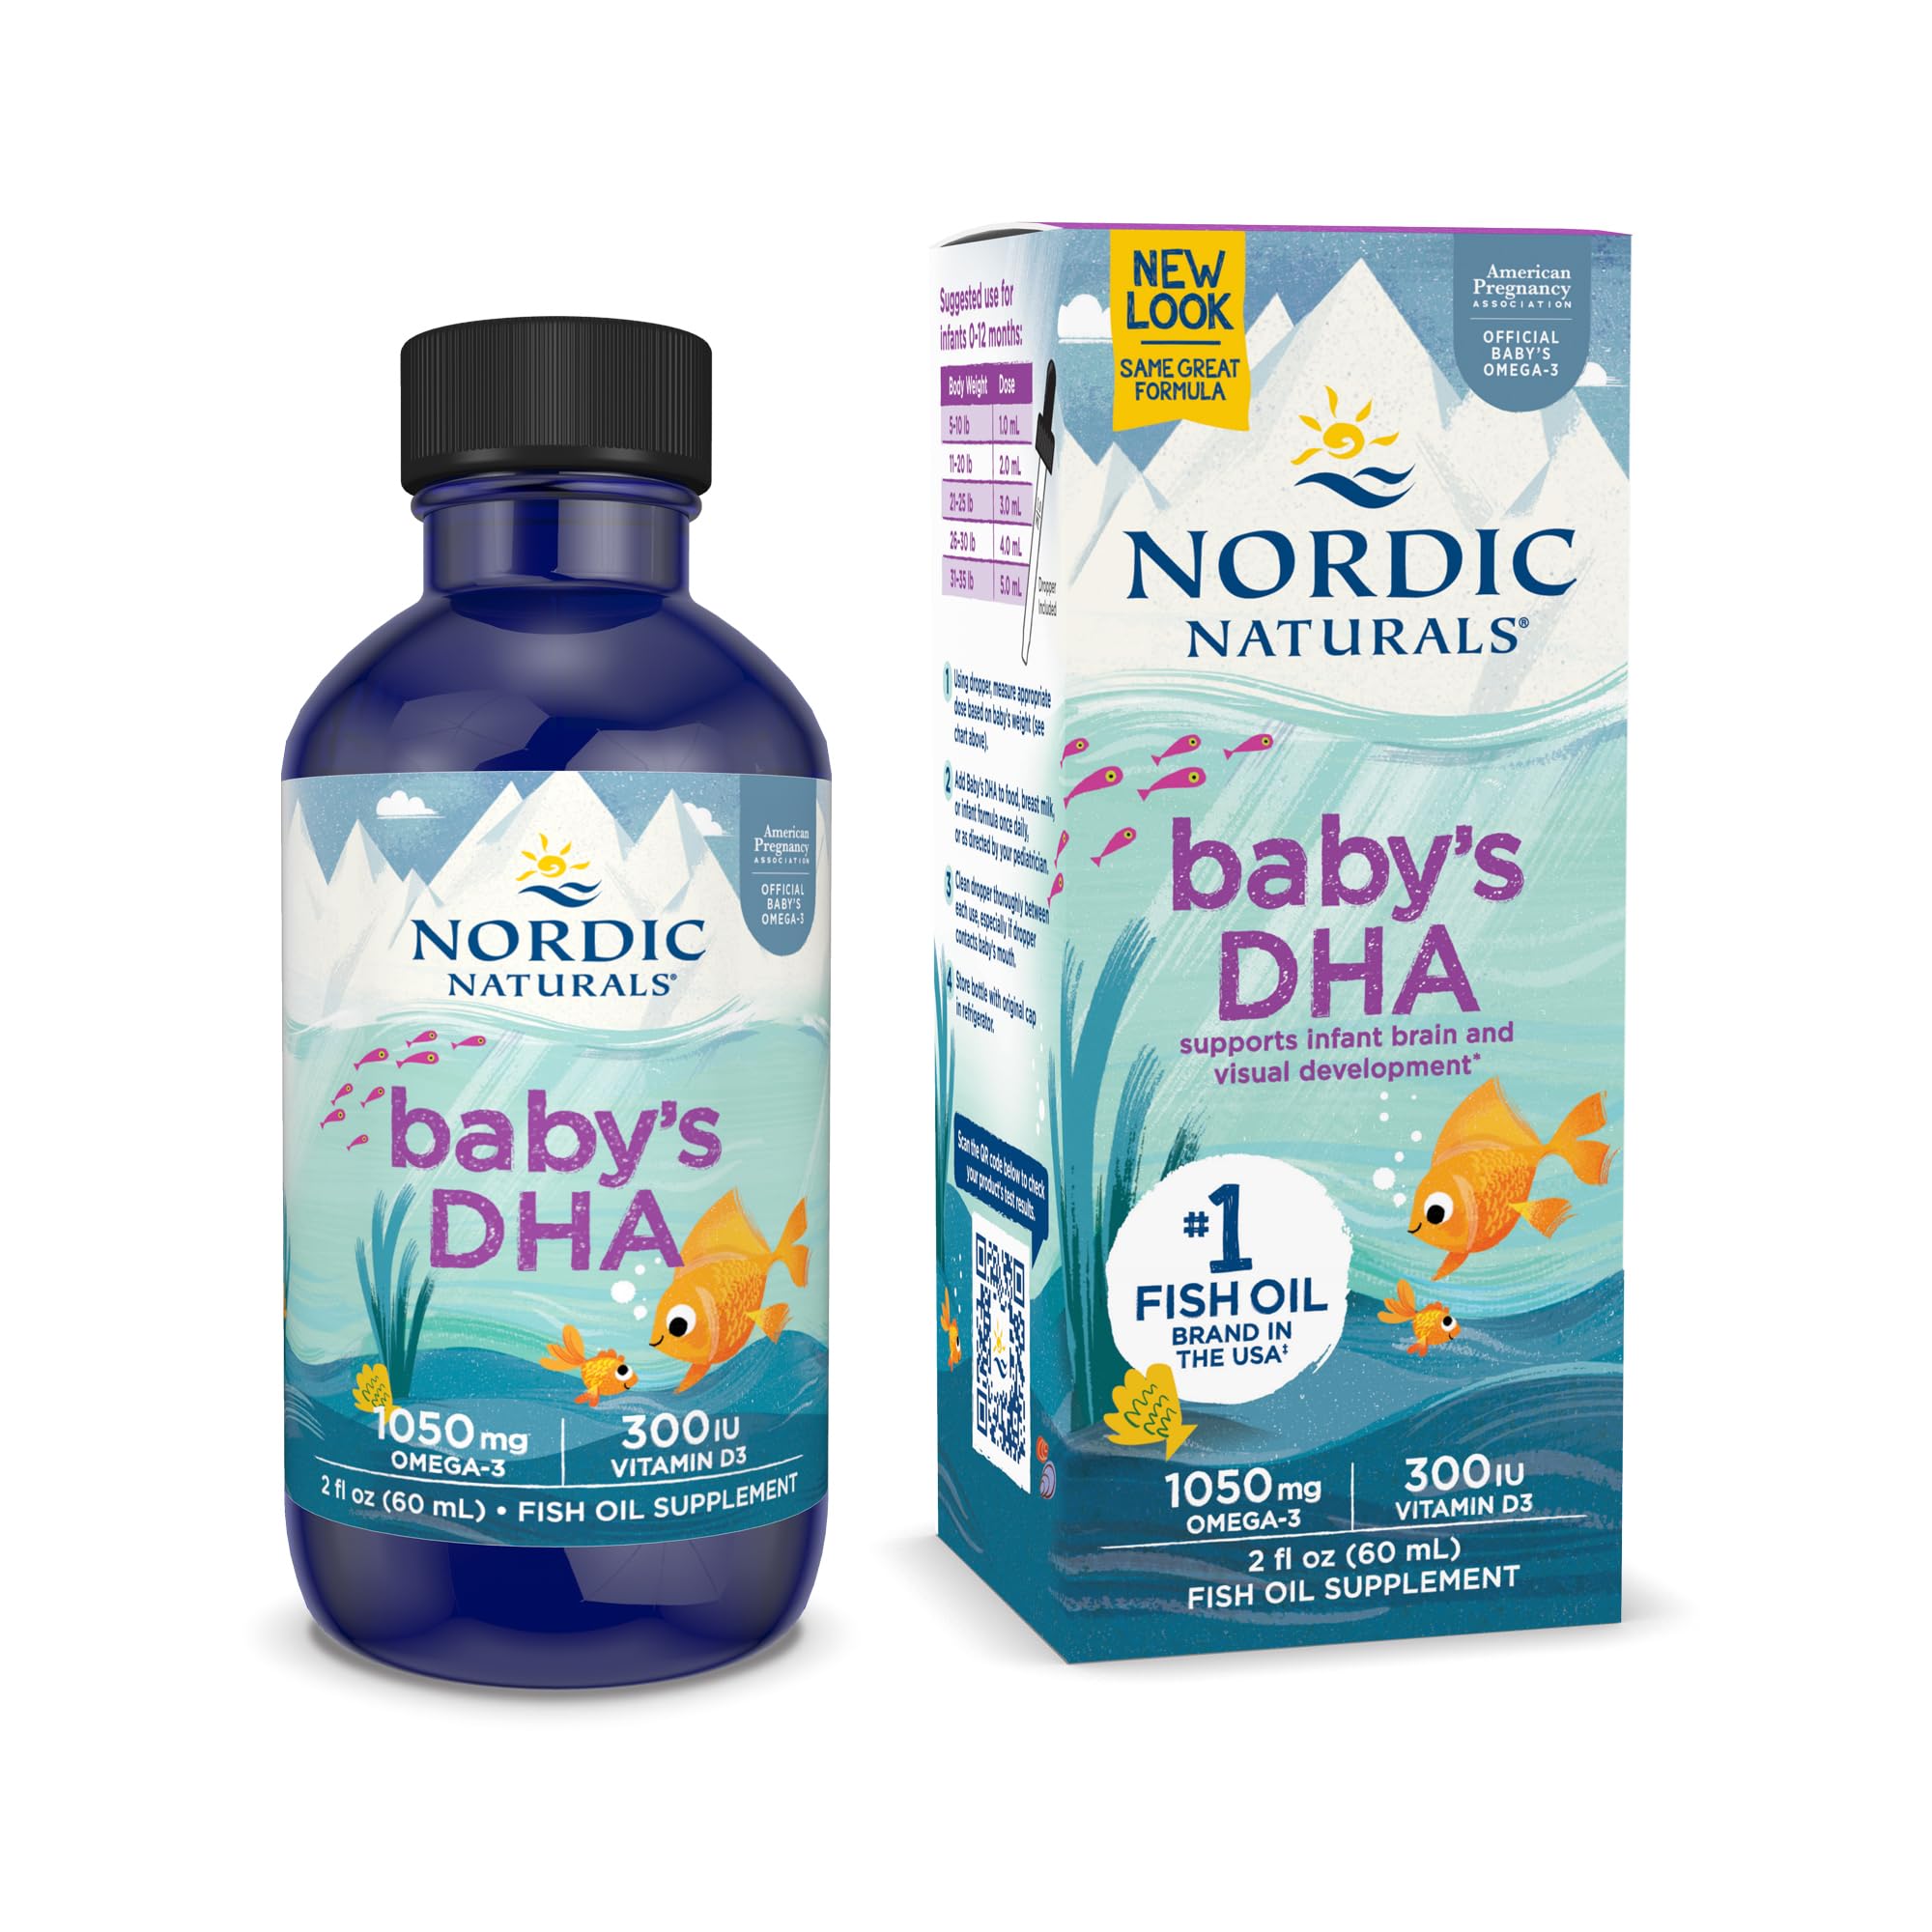 Nordic Naturals Baby’s DHA, Unflavored - 2 oz - 1050 mg Omega-3 + 300 IU Vitamin D3 - Supports Brain, Vision & Nervous System Development in Babies - Non-GMO - 12 Servings